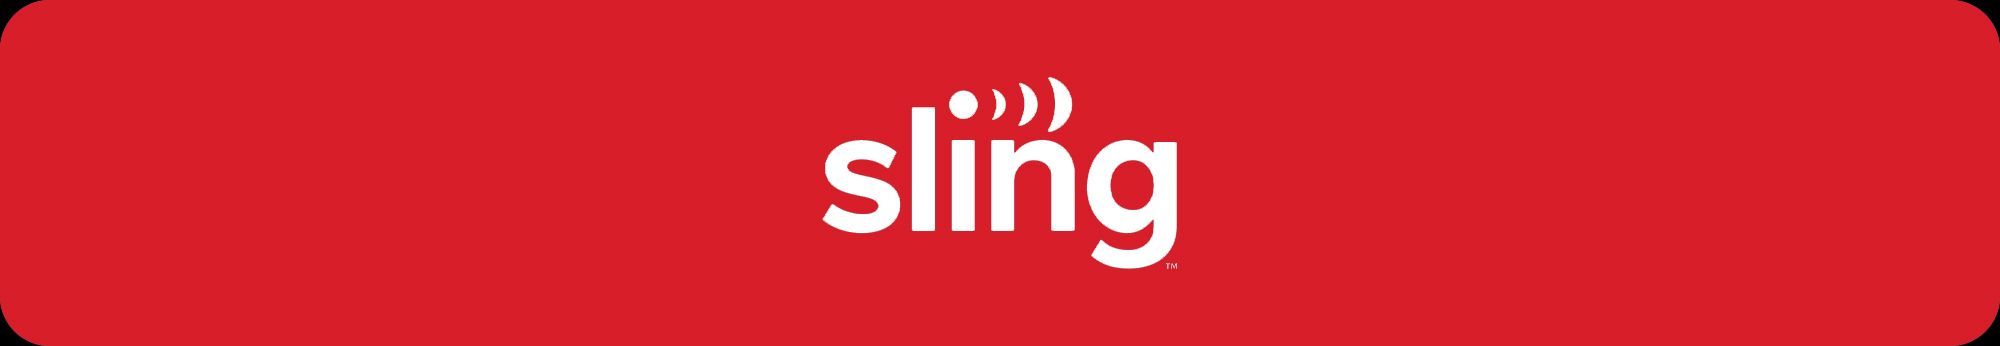 NFL Network, RedZone dropped from Sling TV, DISH following dispute